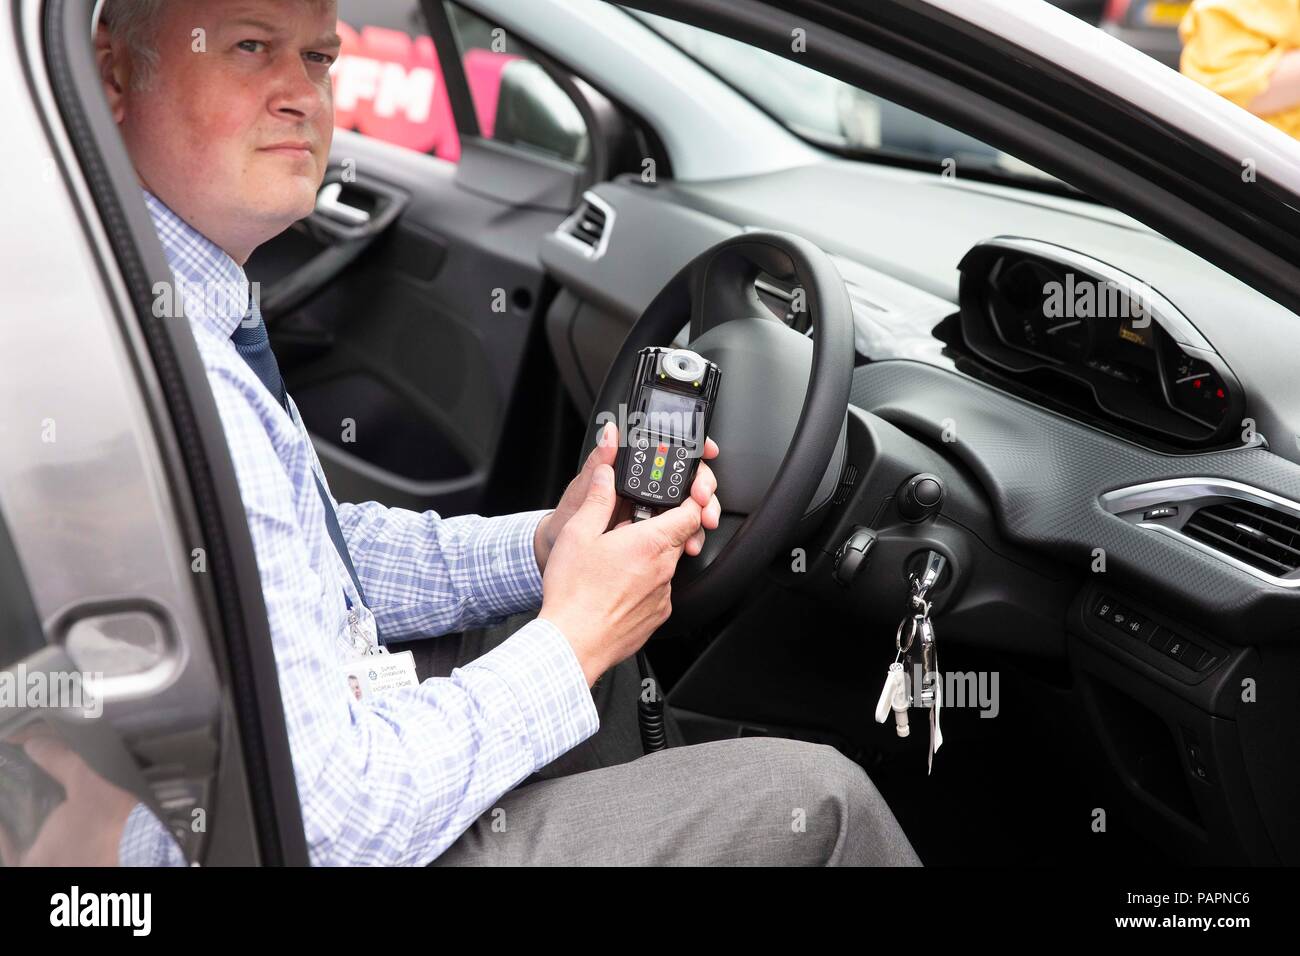 DI Andy Crowe demonstrates the in car alcohol interlock device which stops drink drivers from starting their engine if they are over the legal drink drive limit, at Durham Police headquarters. Stock Photo